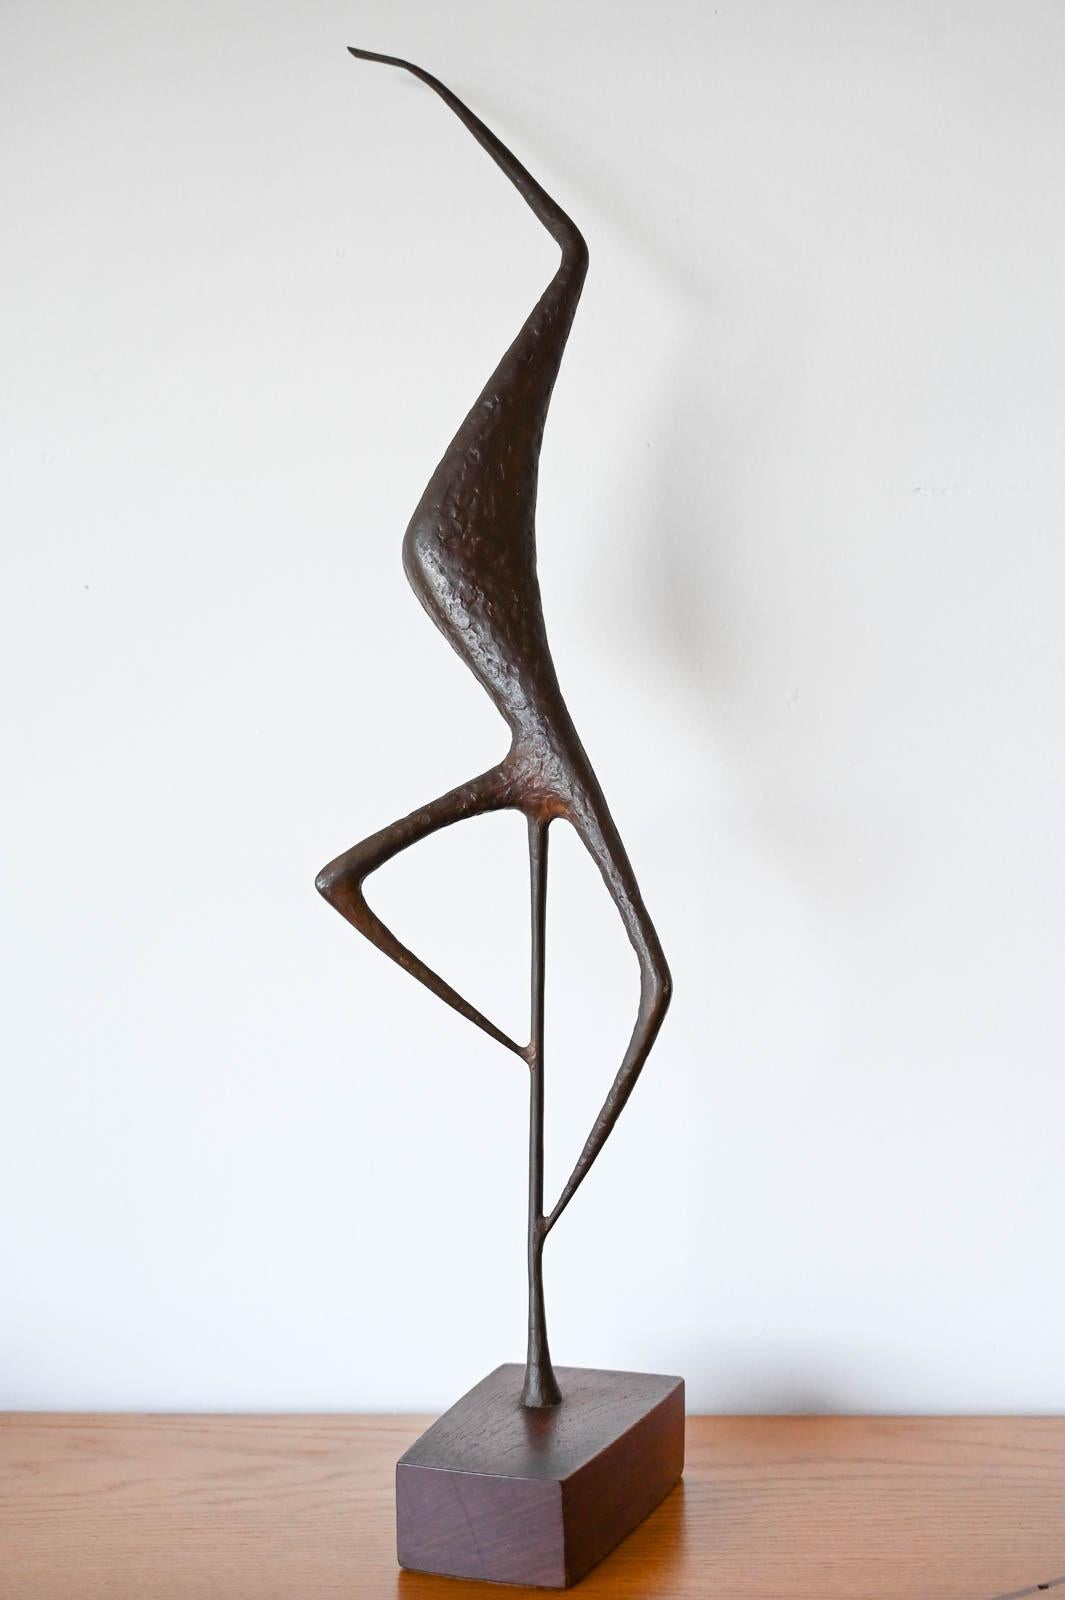 Jack Boyd Modernist Bronze Sculpture, ca. 1965.  Modernist bronze sculpture by California artist Jack Boyd, ca 1965.  9/10 vintage condition.  No losses and great patina.

Measures 6.5